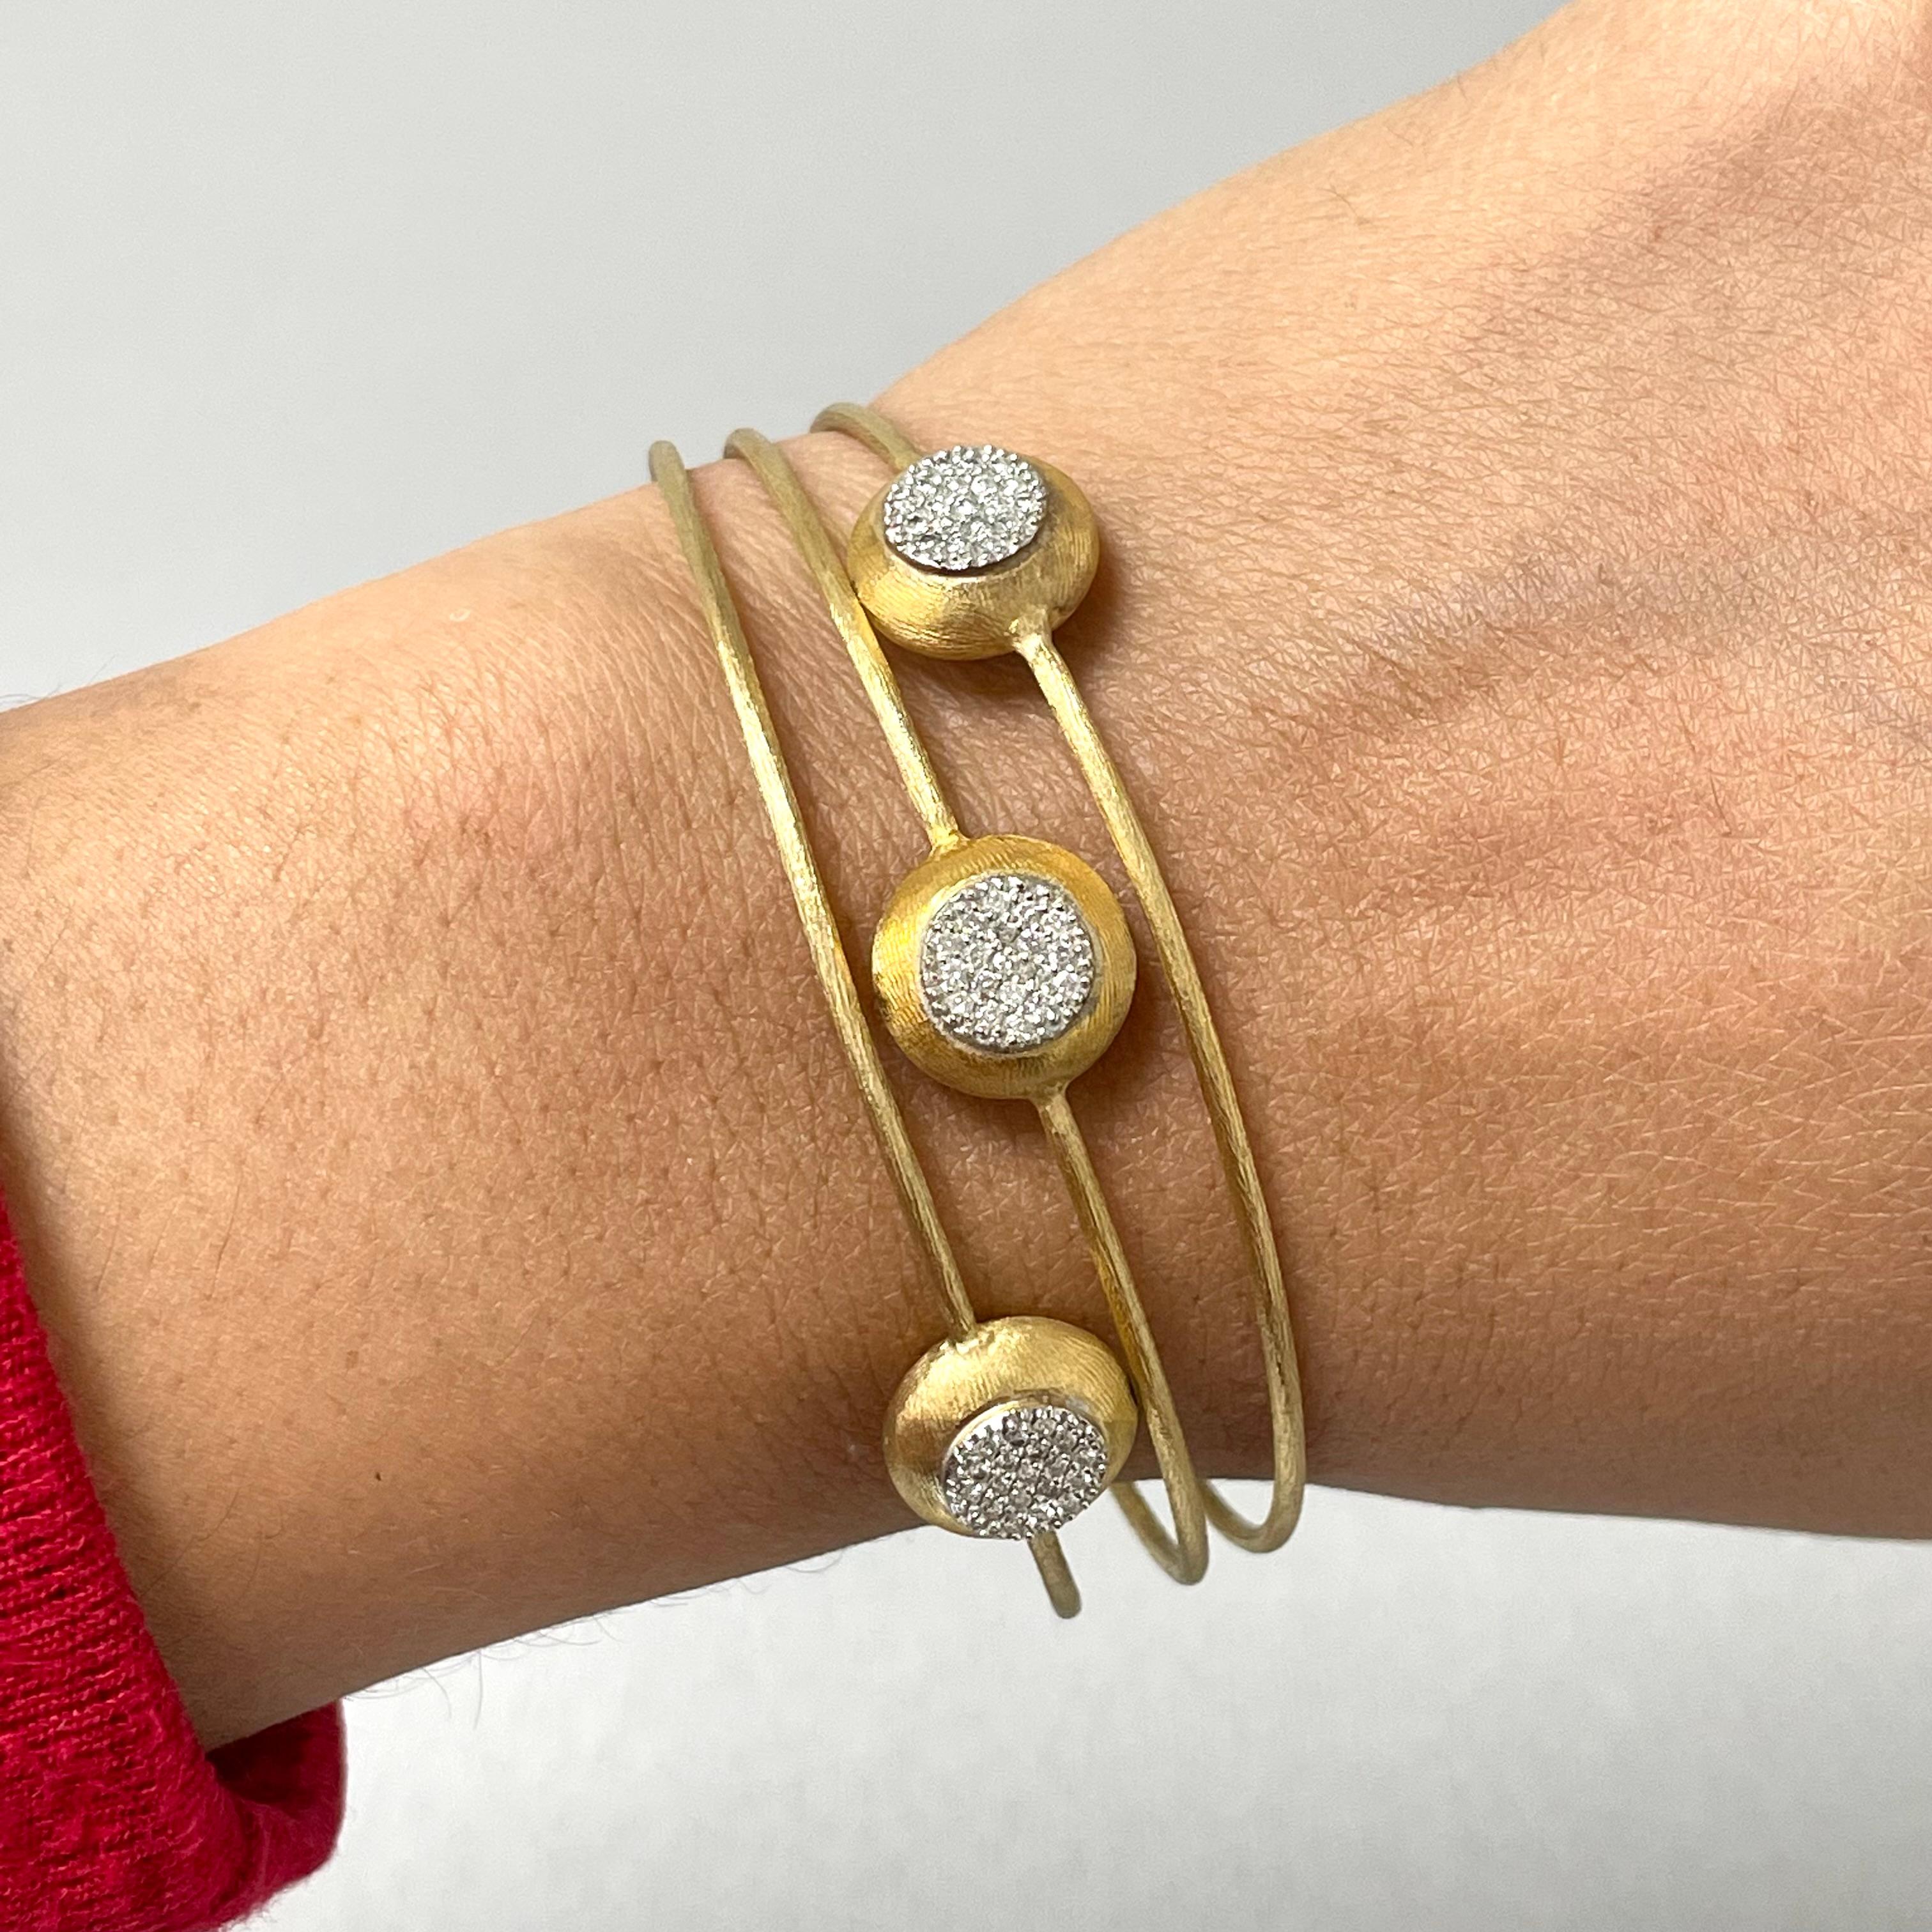 The Trinity Bangles have a unique metal styling giving them the feel of something antique or classical yet modern. They combine bold and delicate elements into a elegant piece of jewelry. 

Total Diamond Weight: 0.43 ct 
Diamond Color: H - I